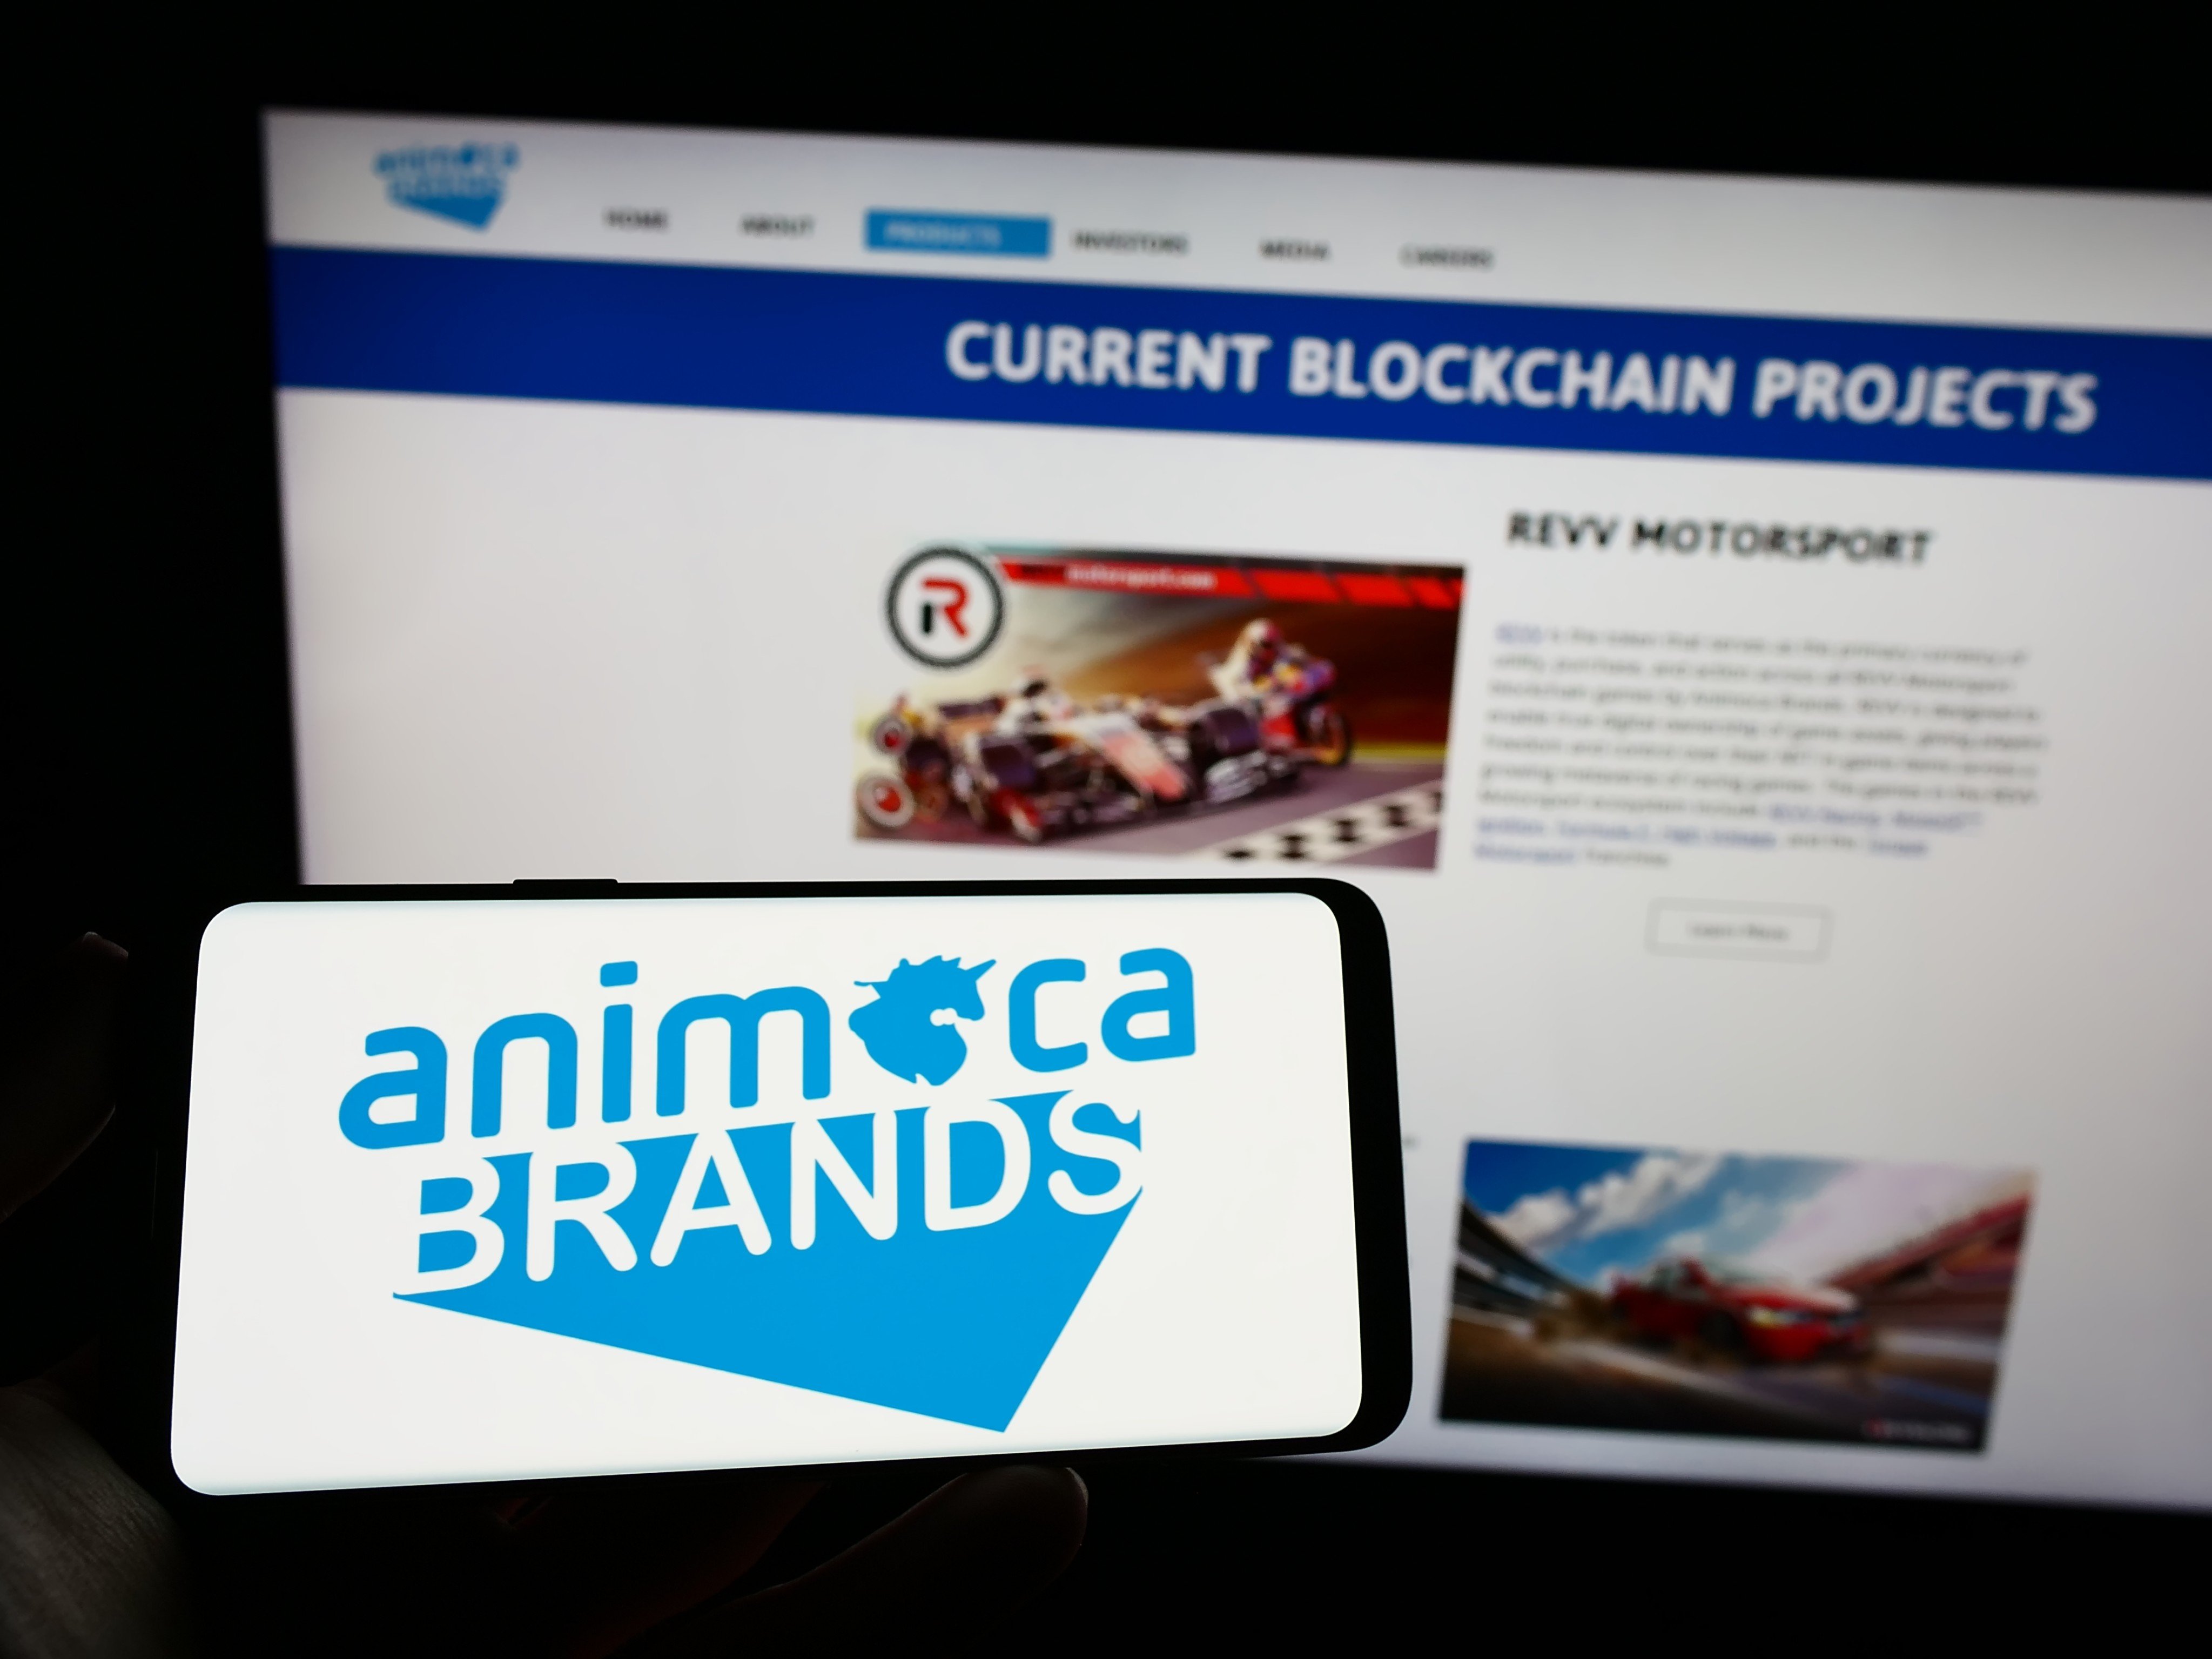 Animoca Brands is investing US$30 million into Hong Kong crypto start-up Hi. Photo: Shutterstock